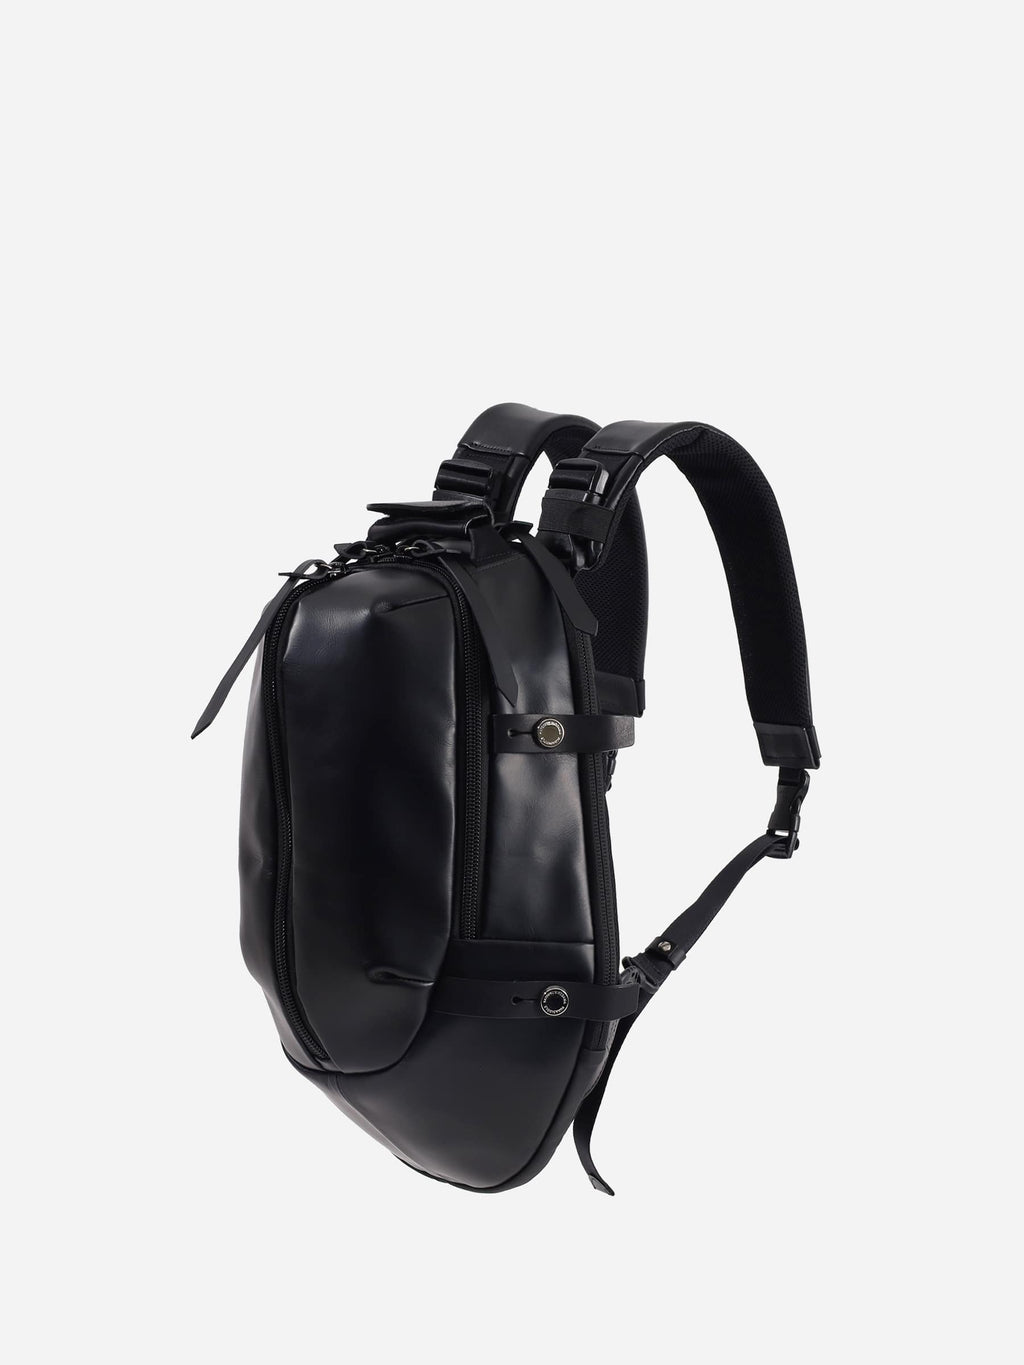 PACK-1-M-C leather backpack (for 14inch pc) カツユキコダマのアイ 